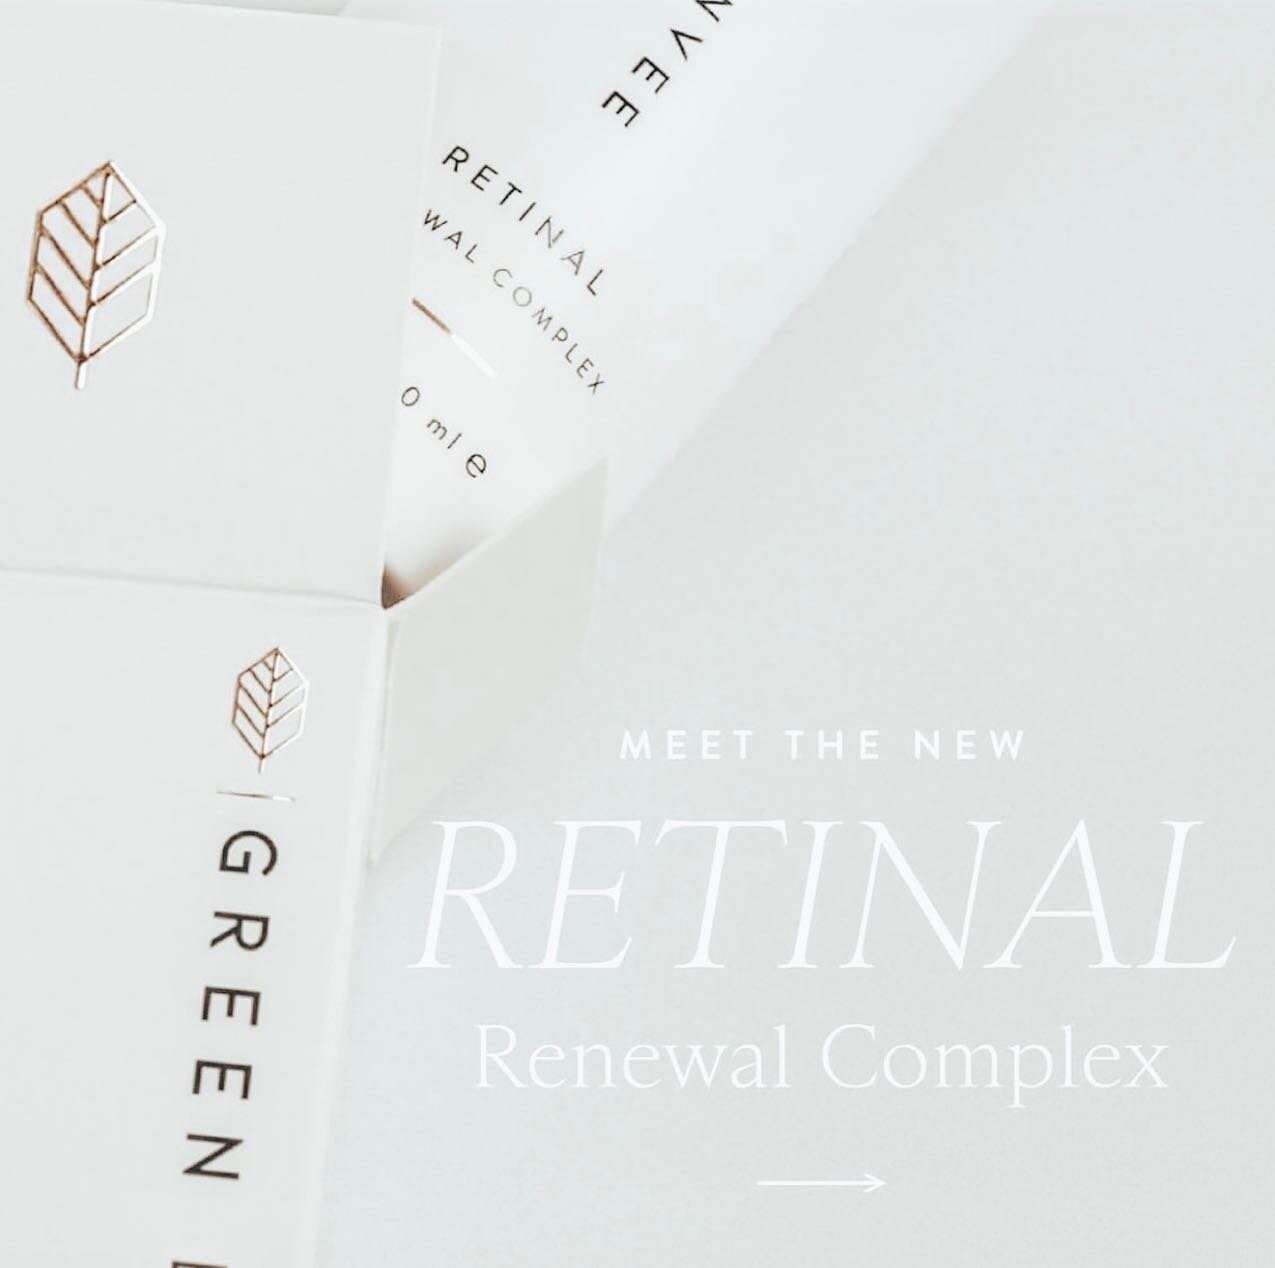 New product alert!!!!!!!

Retinal Renewal Complex is a supercharged 4 serum brimming with skin corrective and complexion nourishing actives. The ultimate rejuvenating serum to all target signs of aging!

KEY ACTIVE INGREDIENTS:

&bull; RETINAL COMPLE